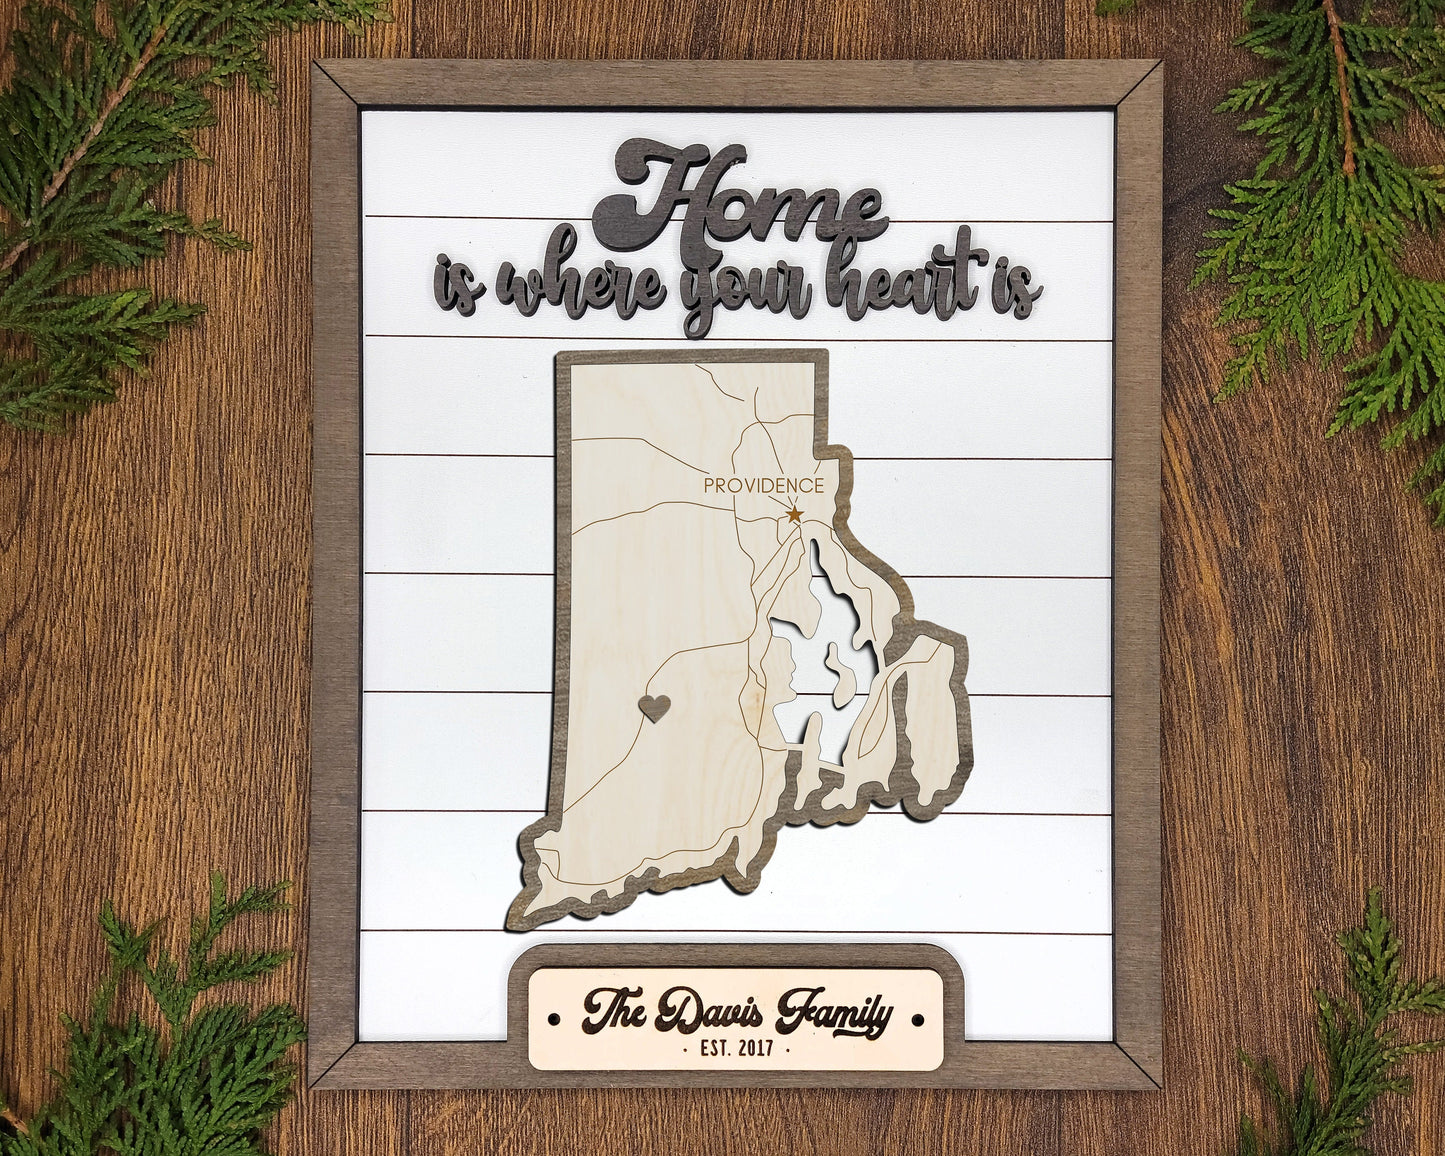 The Rhode Island State Frame - 13 text options, 12 backgrounds, 25 icons Included - Make over 7,500 designs - Glowforge & Lightburn Tested